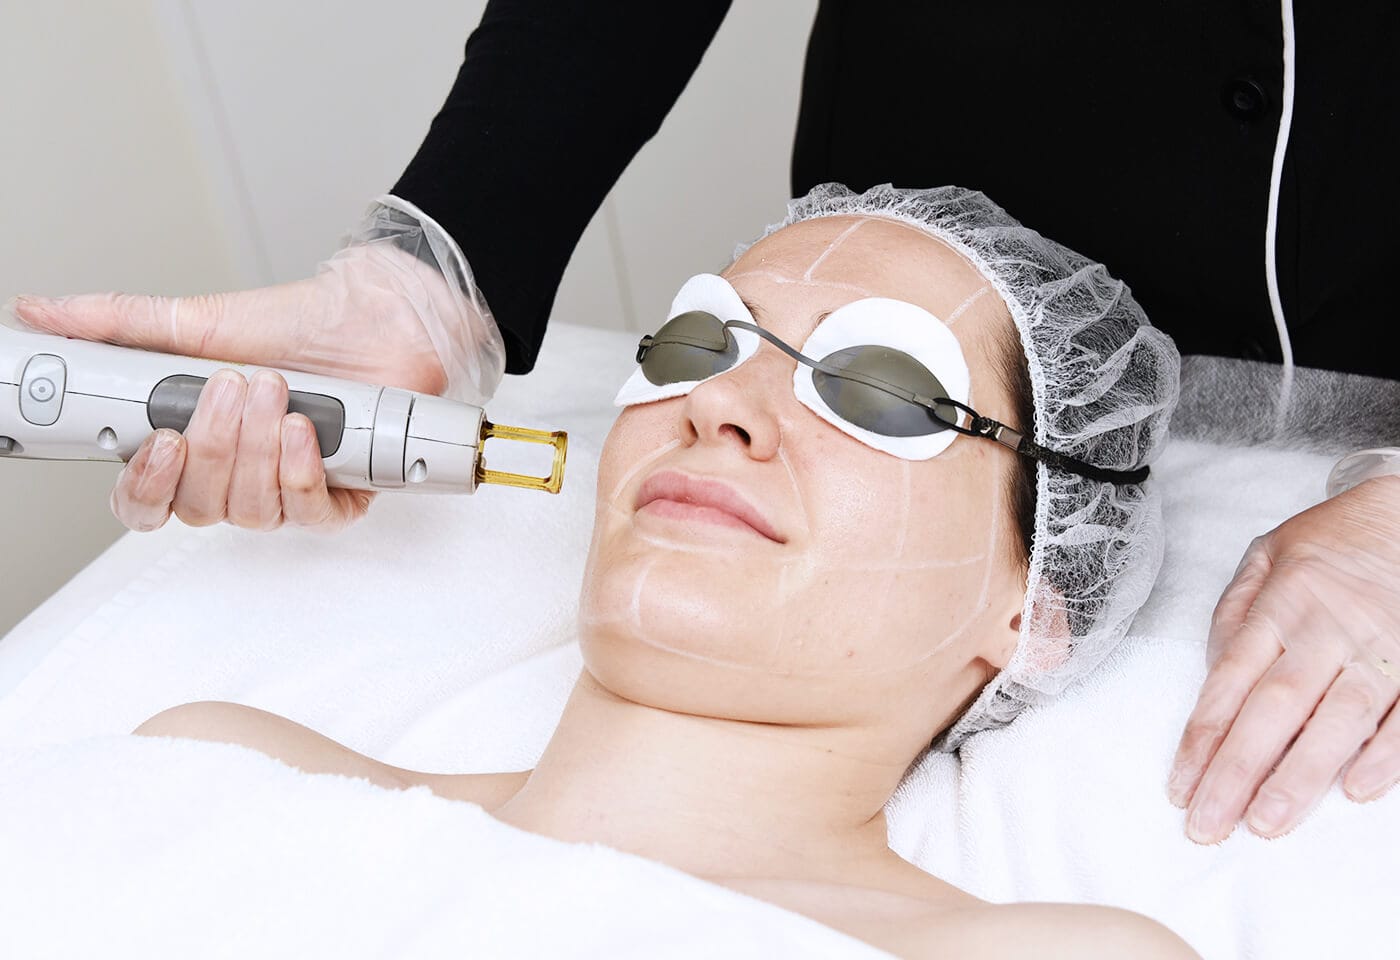 Advantages of Laser Treatments for Pigmentation Removal